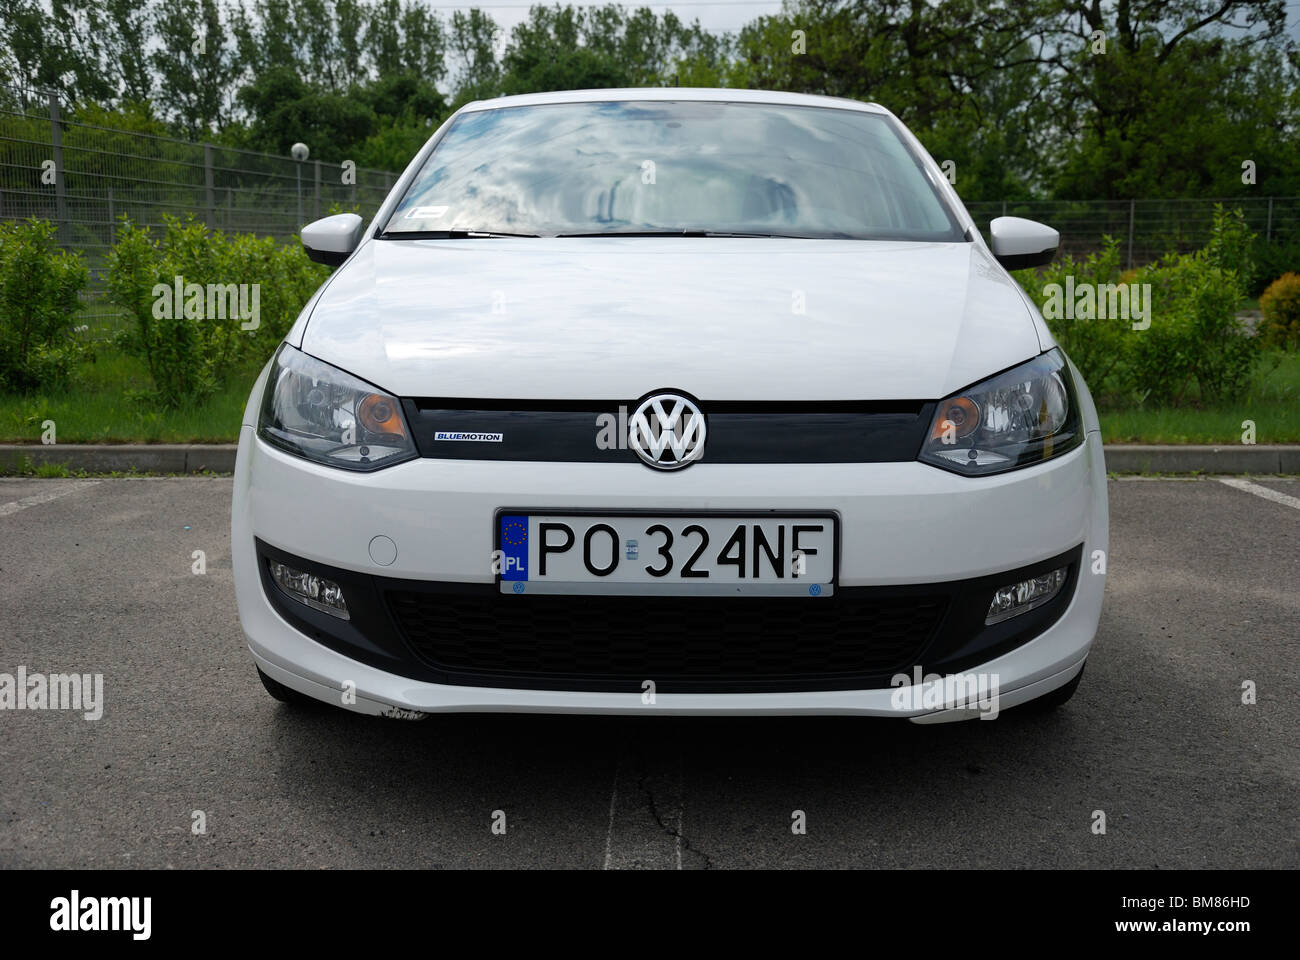 Polo 1.2 TDI BlueMotion - MY 2010 - white - five doors (5D) - German subcompact city car - parking space Stock Photo - Alamy